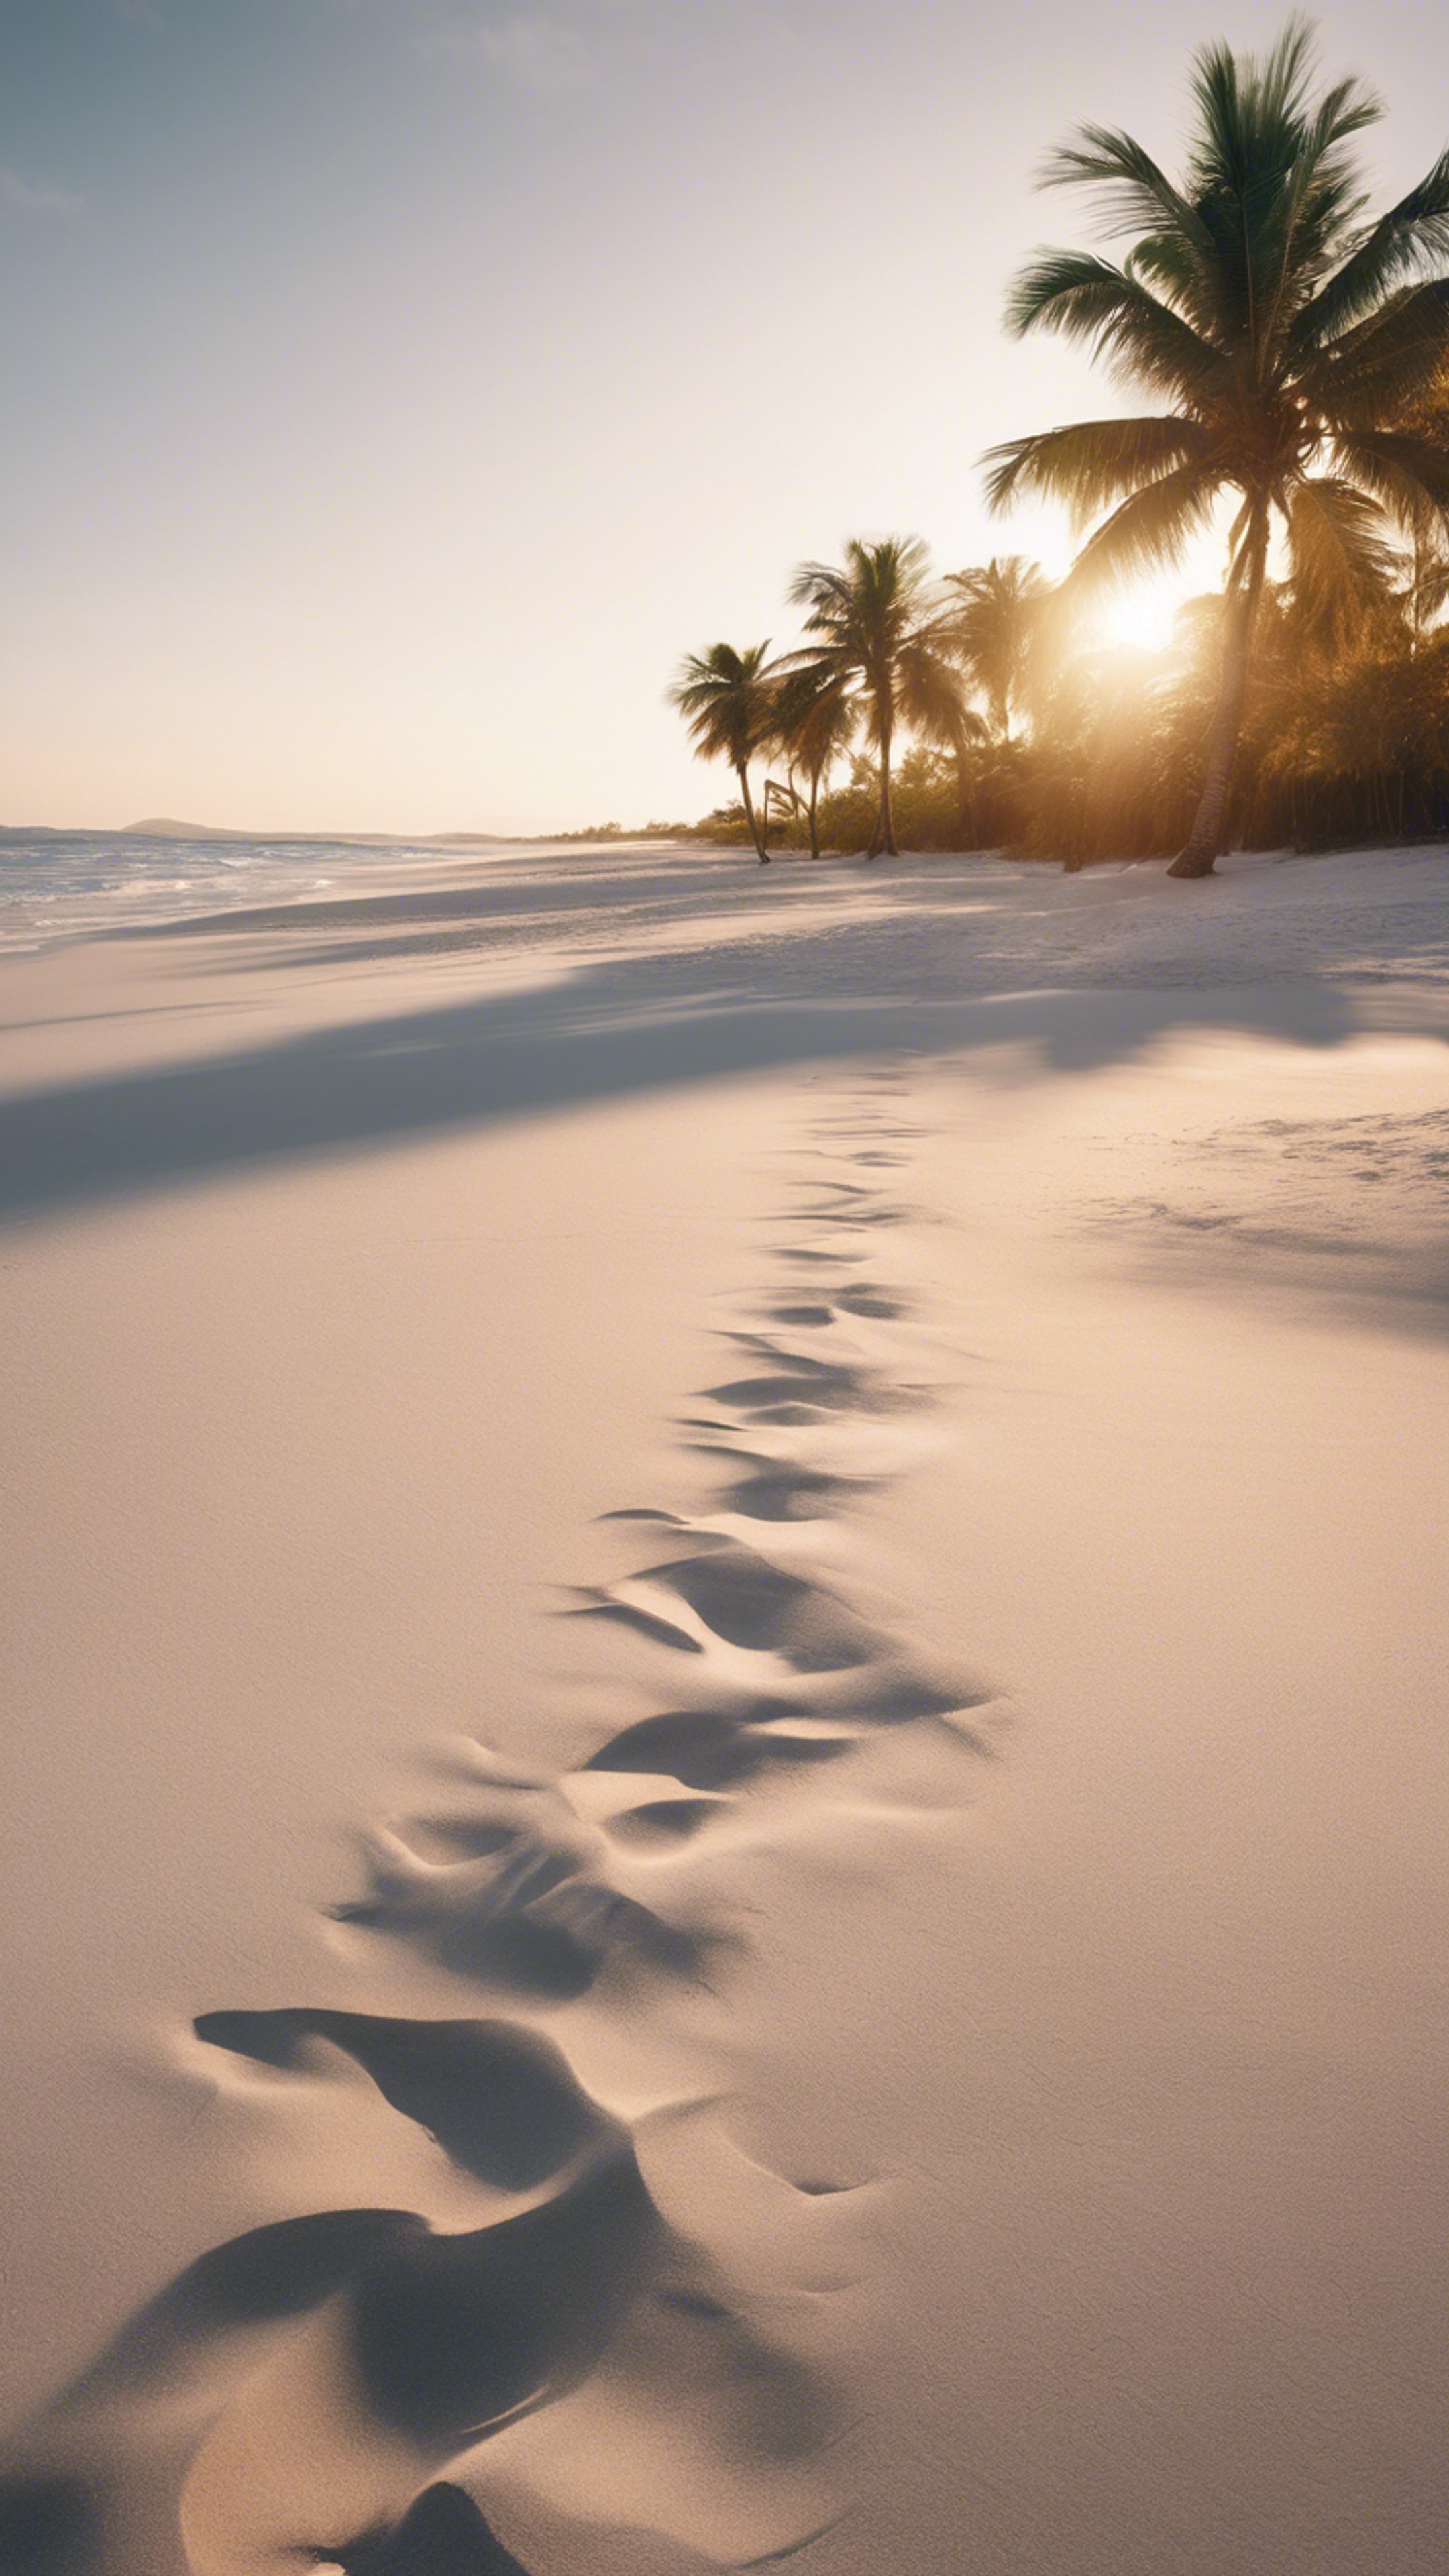 A serene tropical beach during sunset, with palm trees casting long shadows across the white sands.壁紙[cfbfed140d5748dfb472]